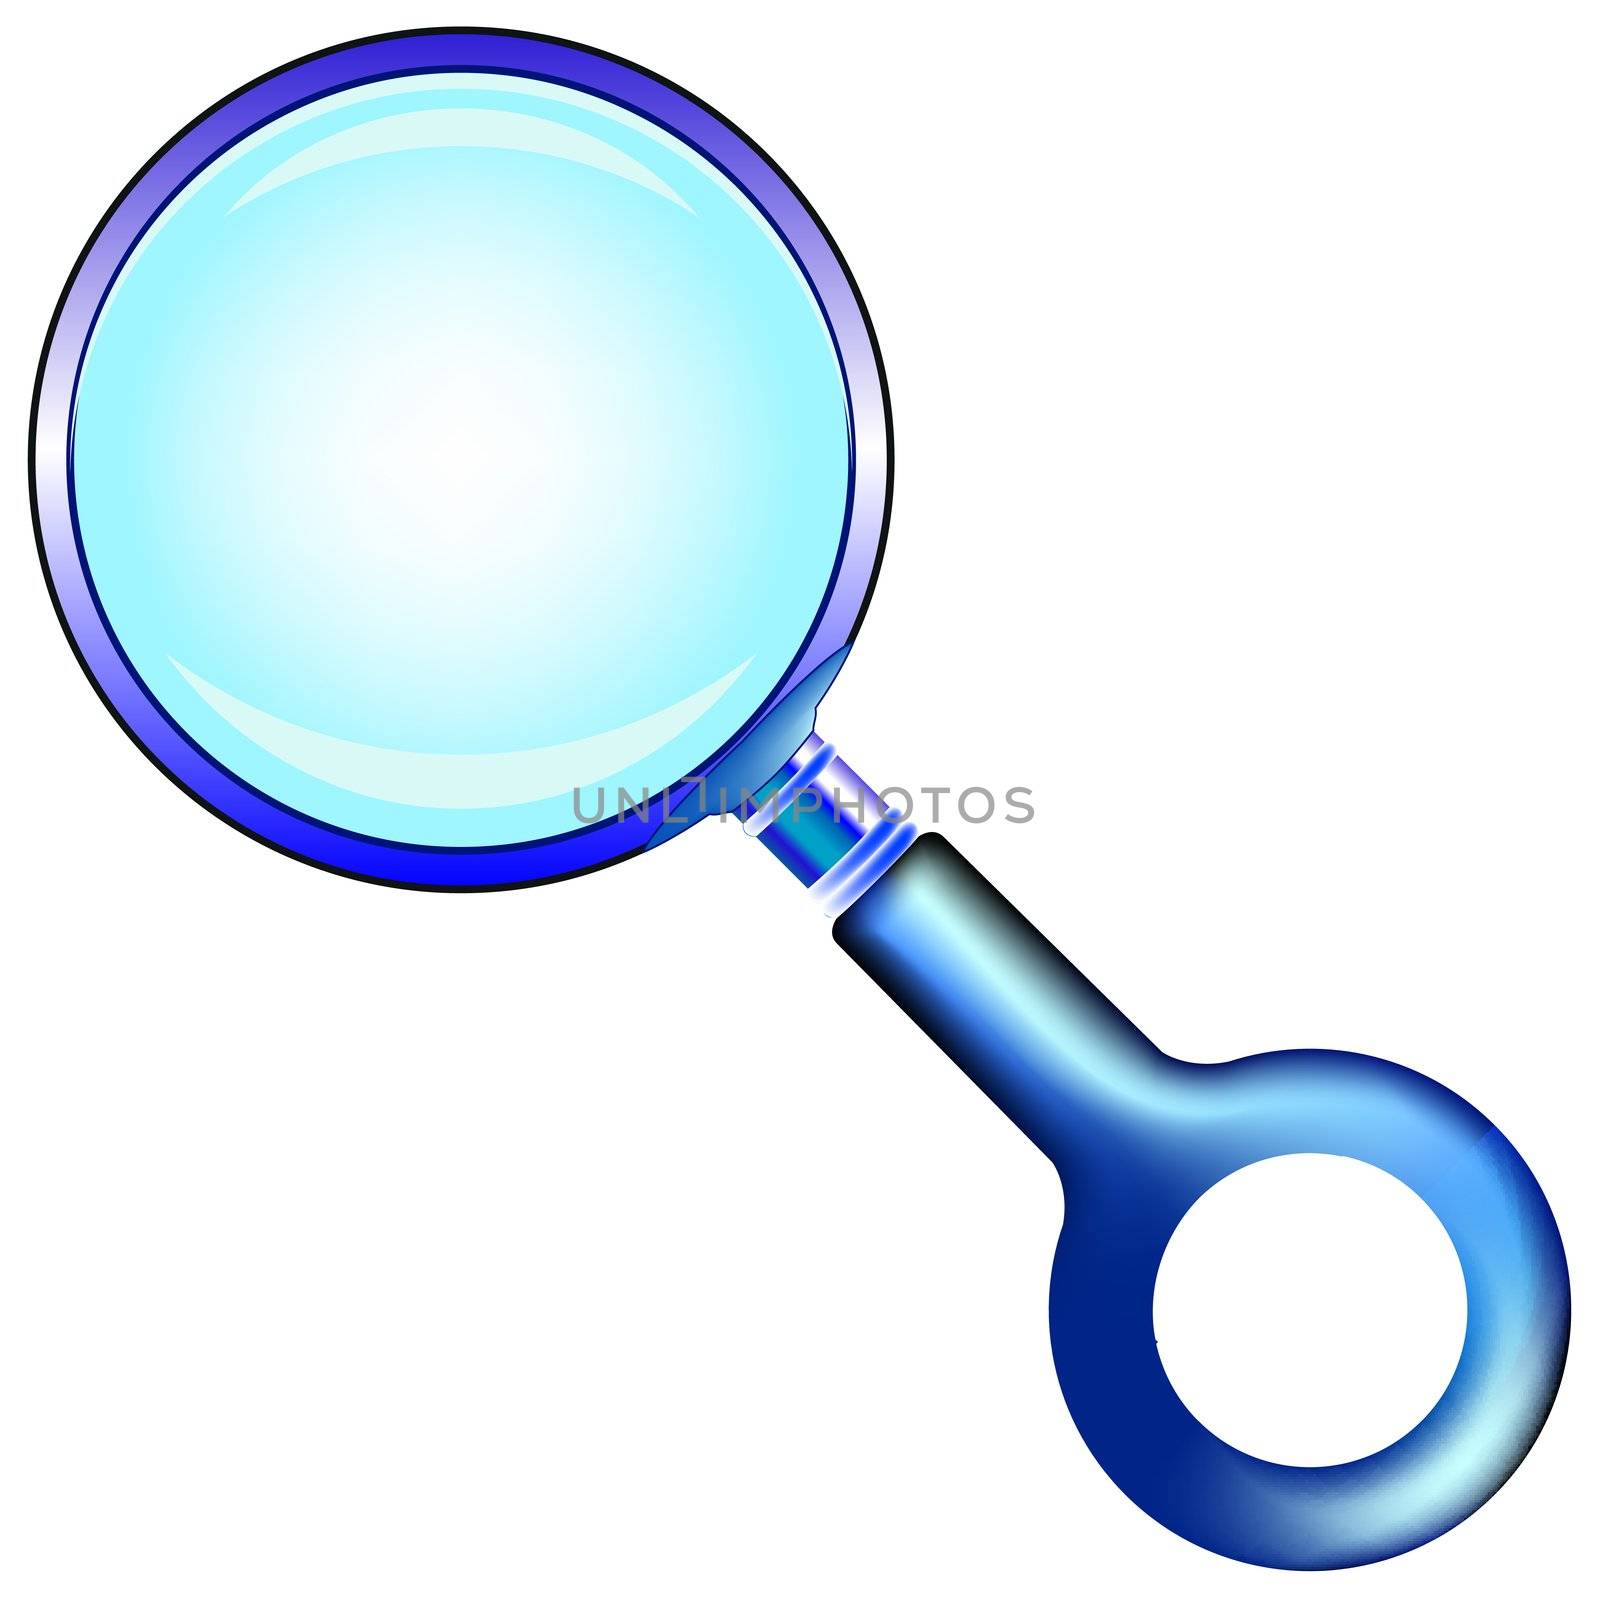 blue magnifying glass against white background; abstract vector art illustration